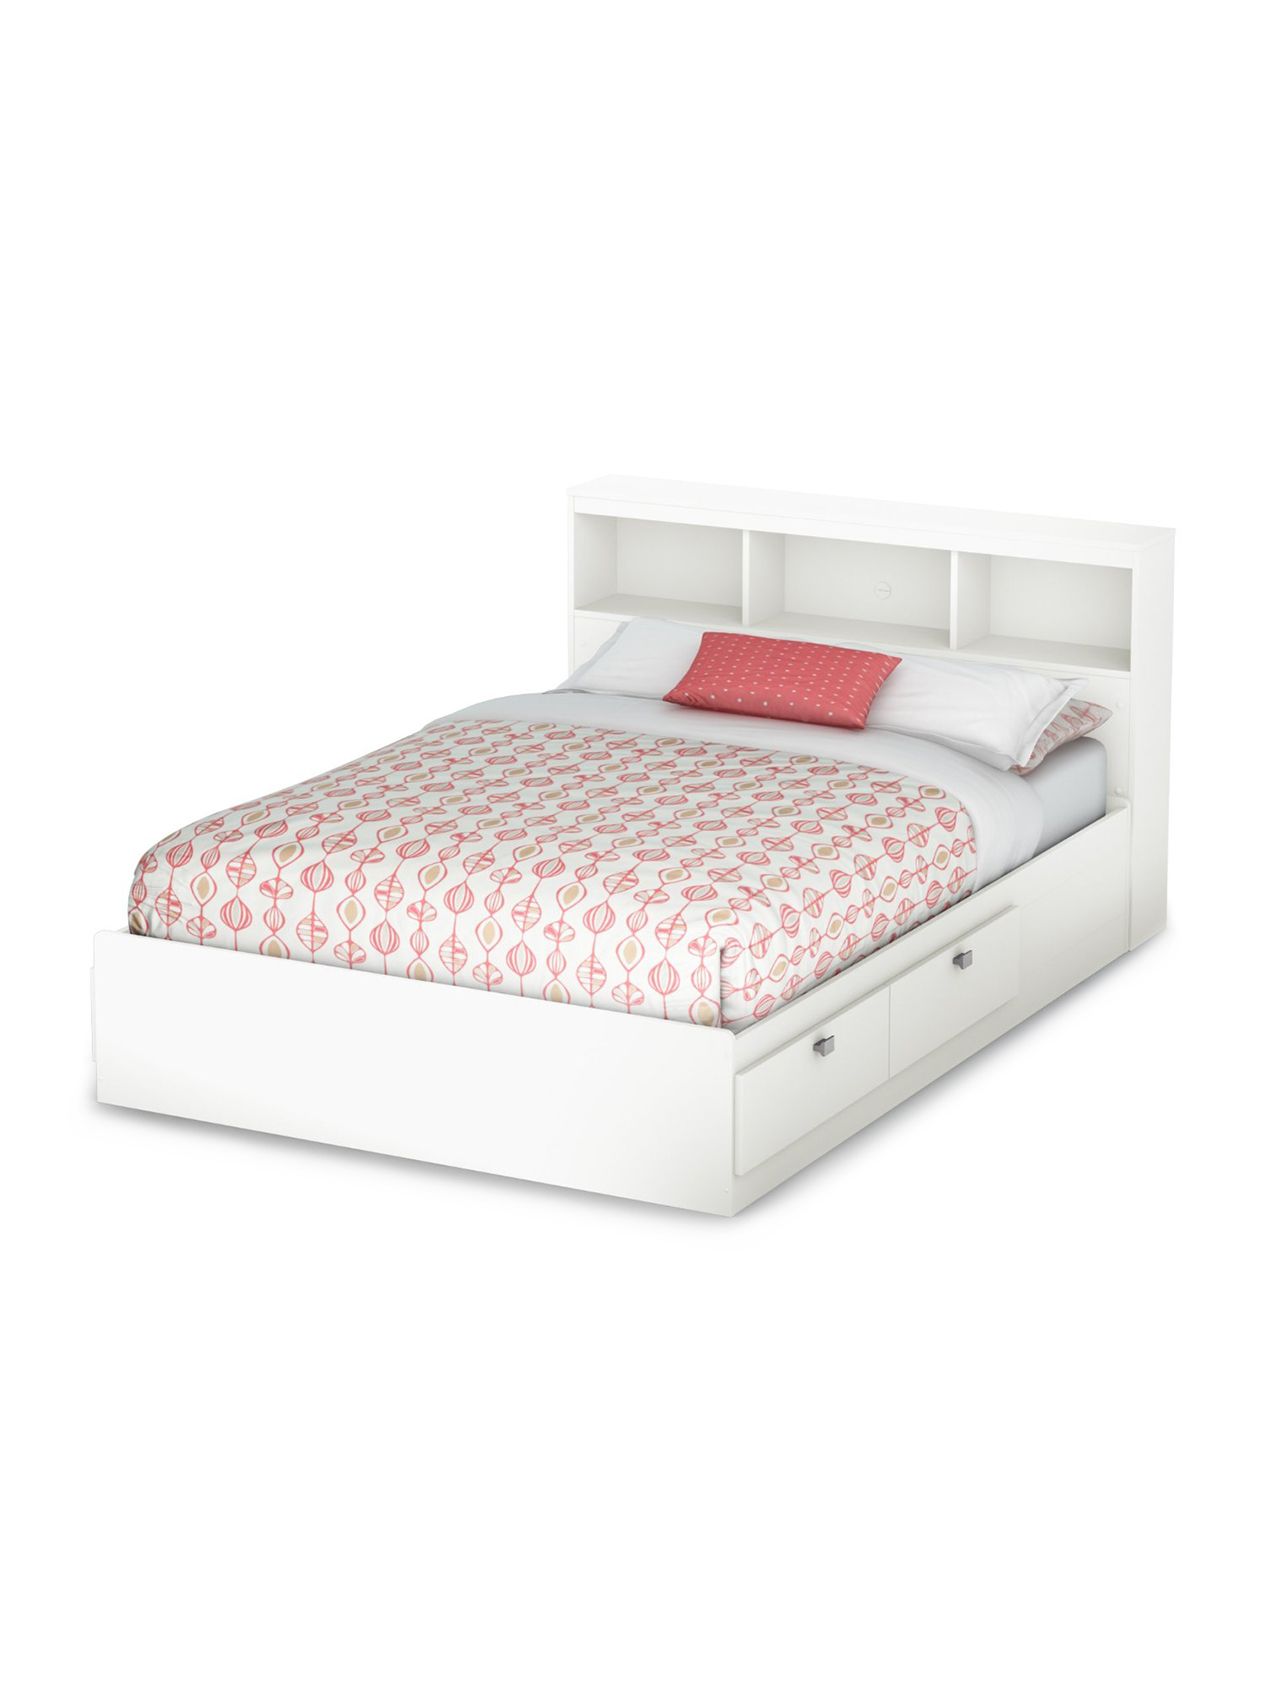 South Shore Spark Full Storage Bed and Bookcase Headboard